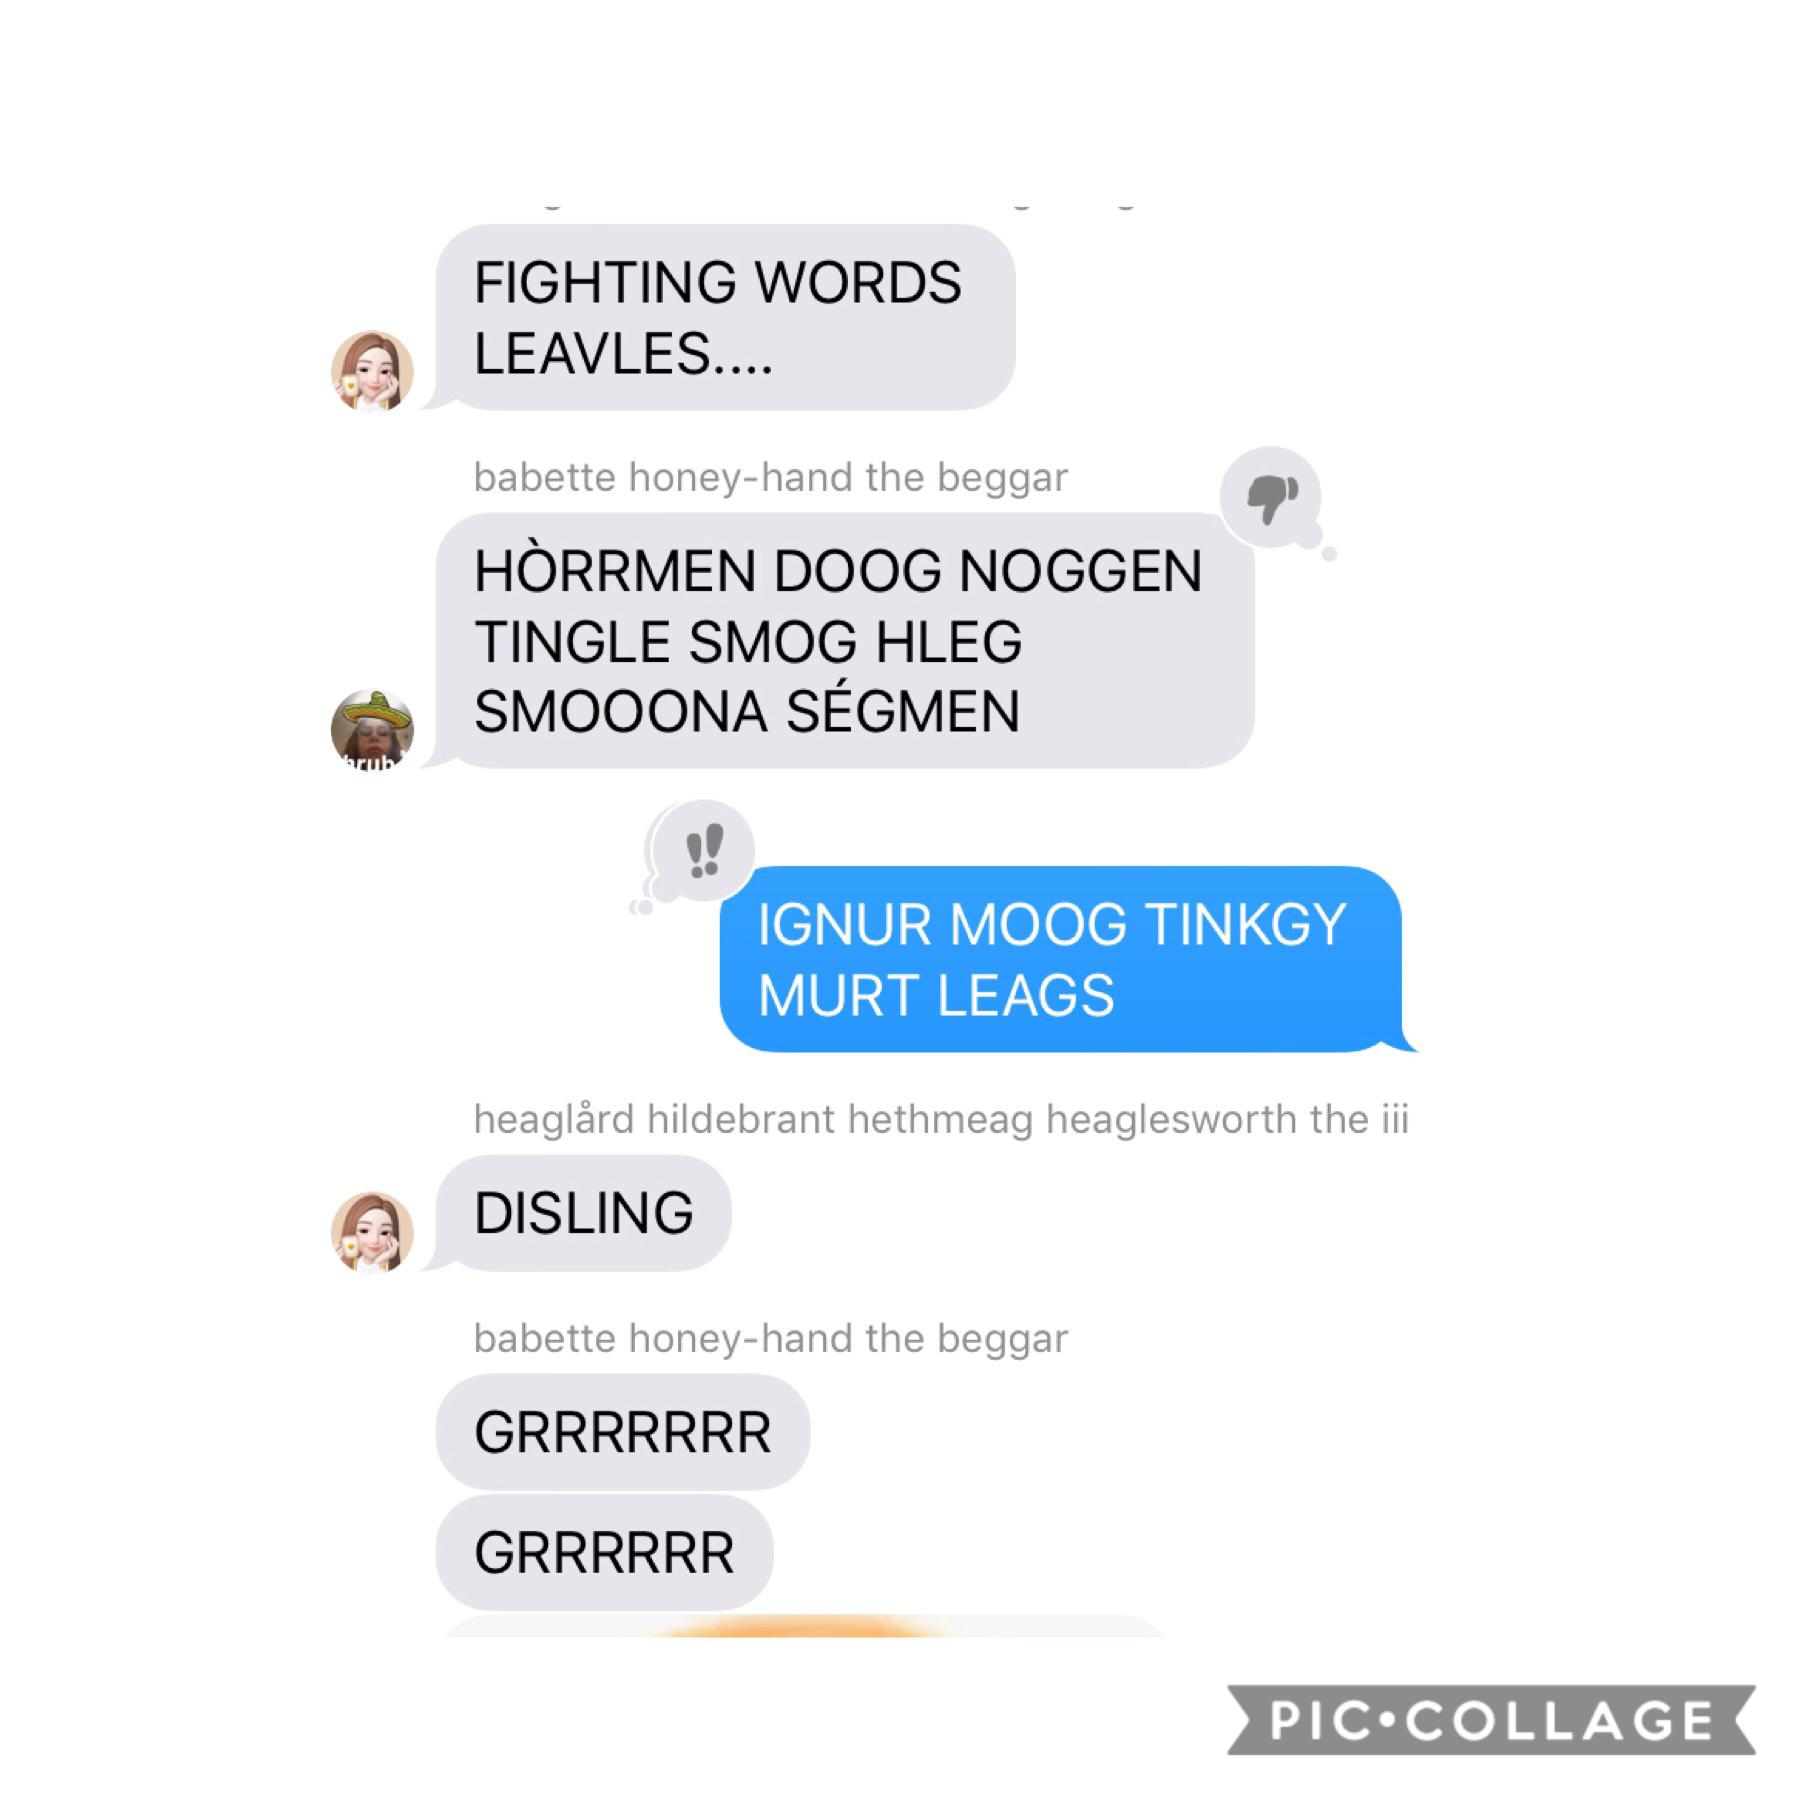 heather, leah and i communicating in simlish at 1 am 😚😚😚